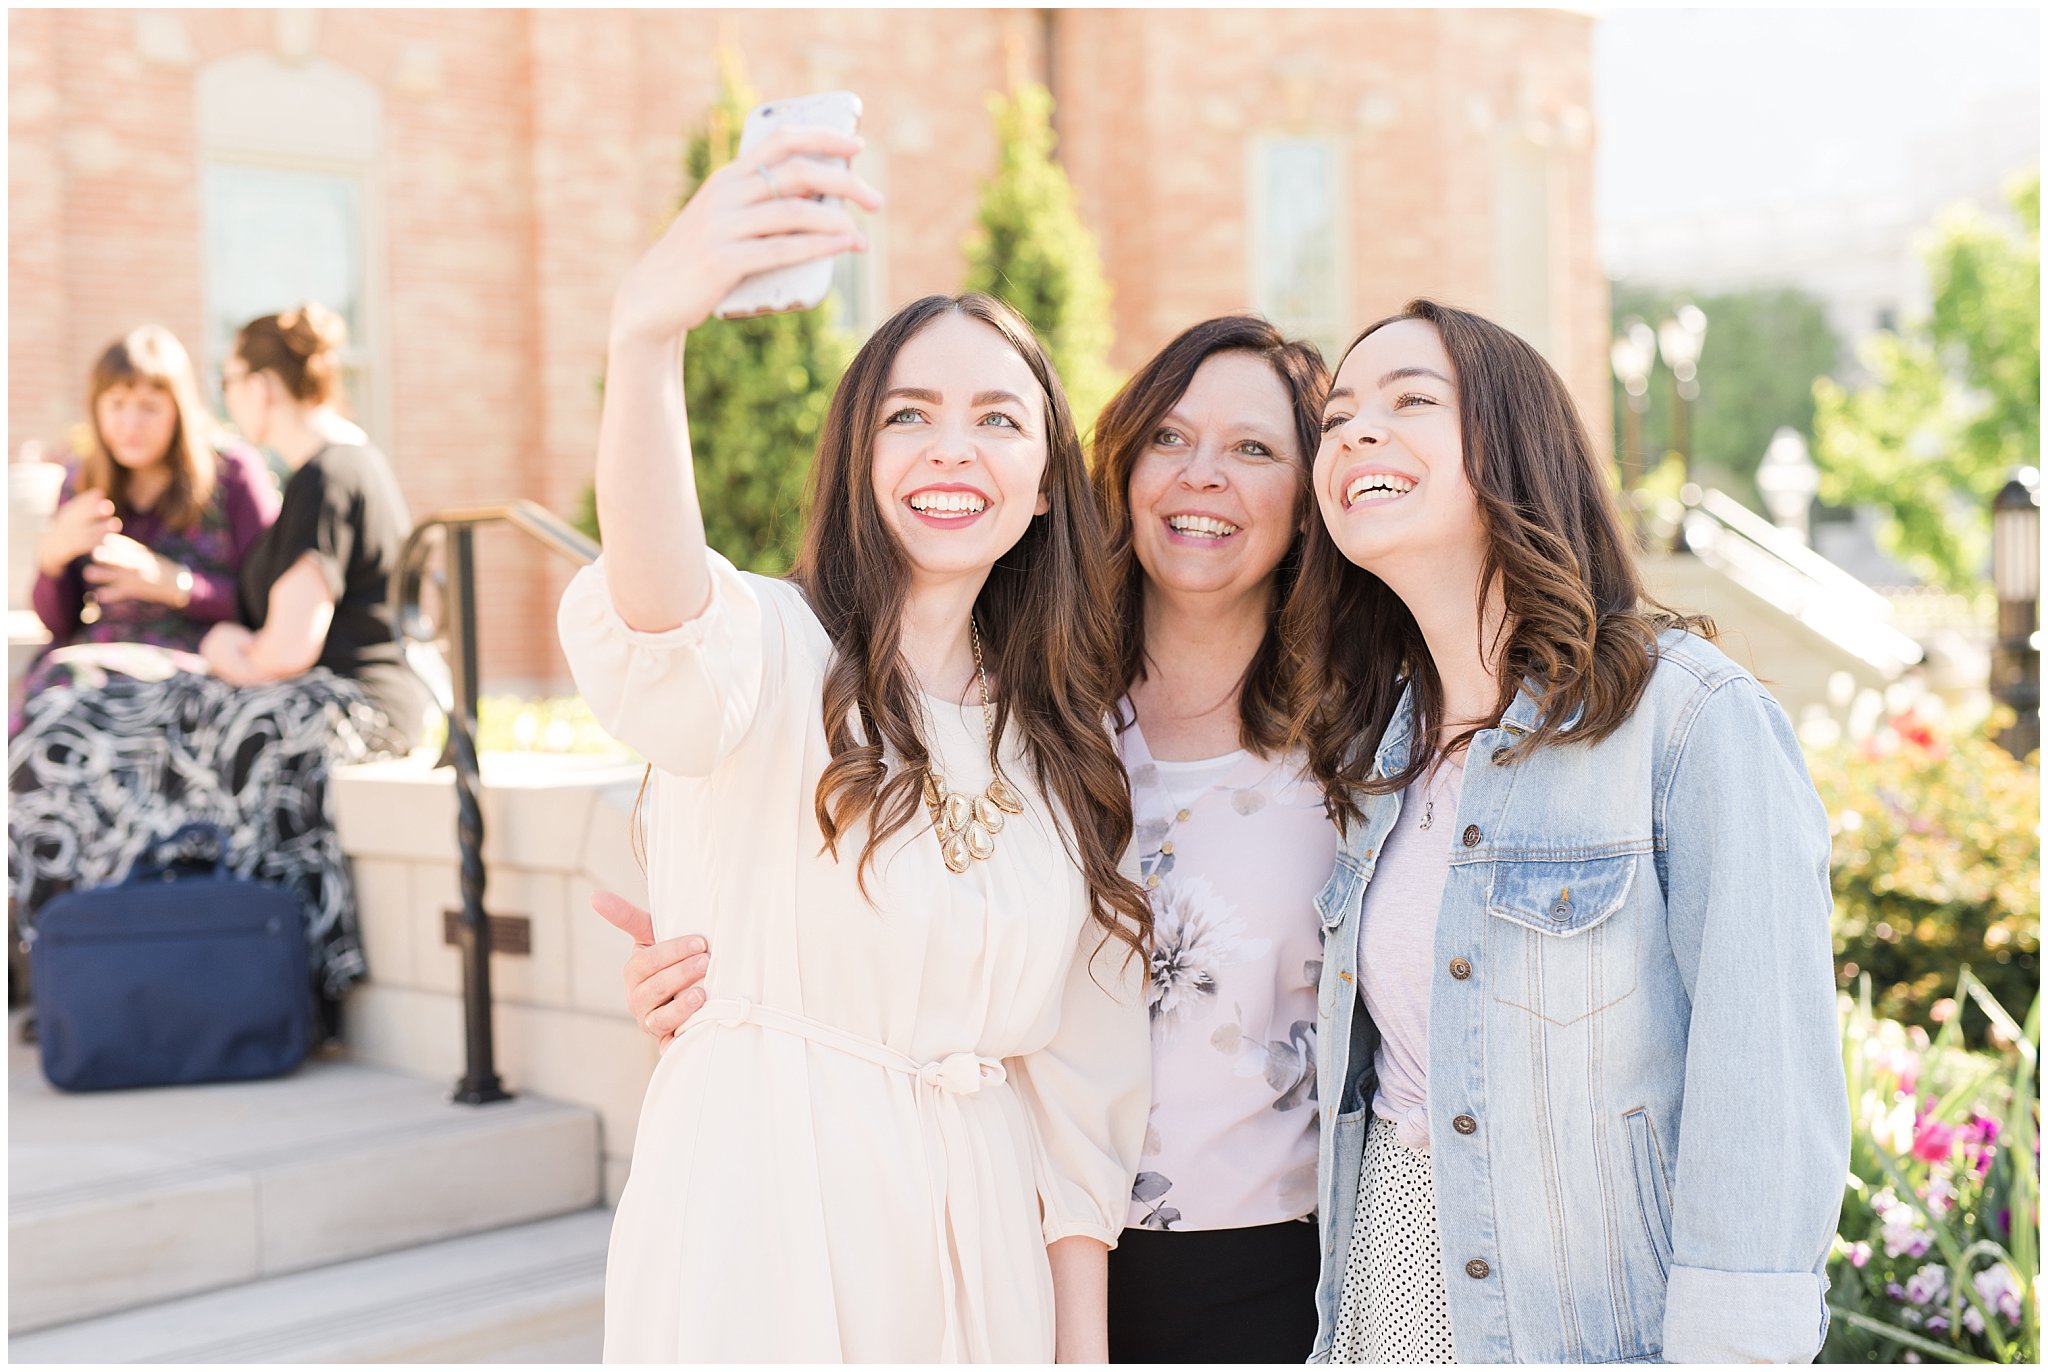 Wedding guests at Provo City Center temple with grey, blush, and light blue wedding colors | Spring Provo City Center Temple Wedding | Utah Wedding Photographers | Jessie and Dallin Photography